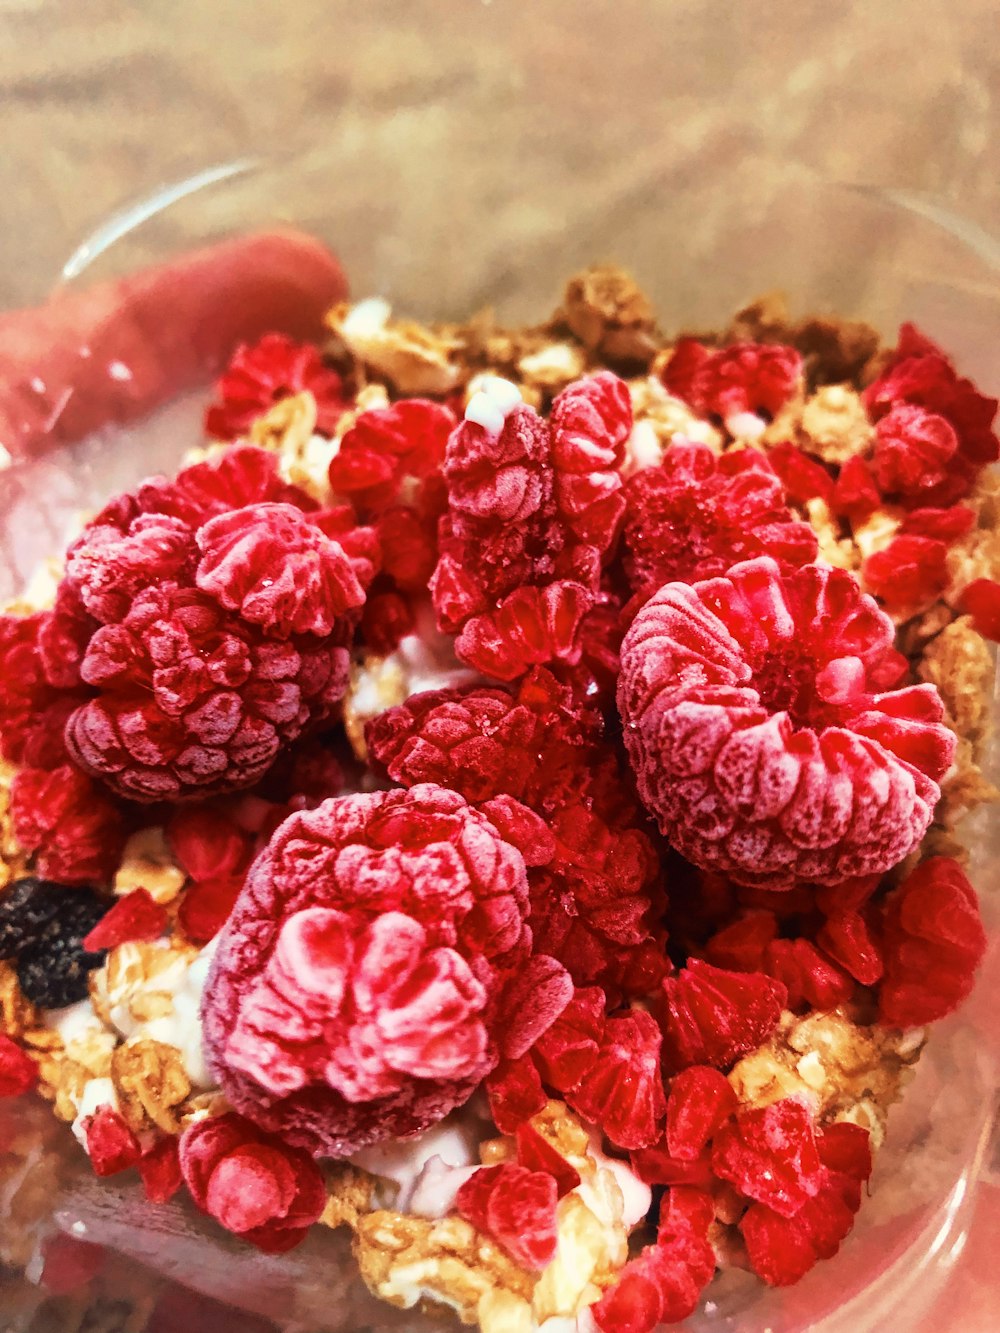 a close up of a bowl of cereal with raspberries